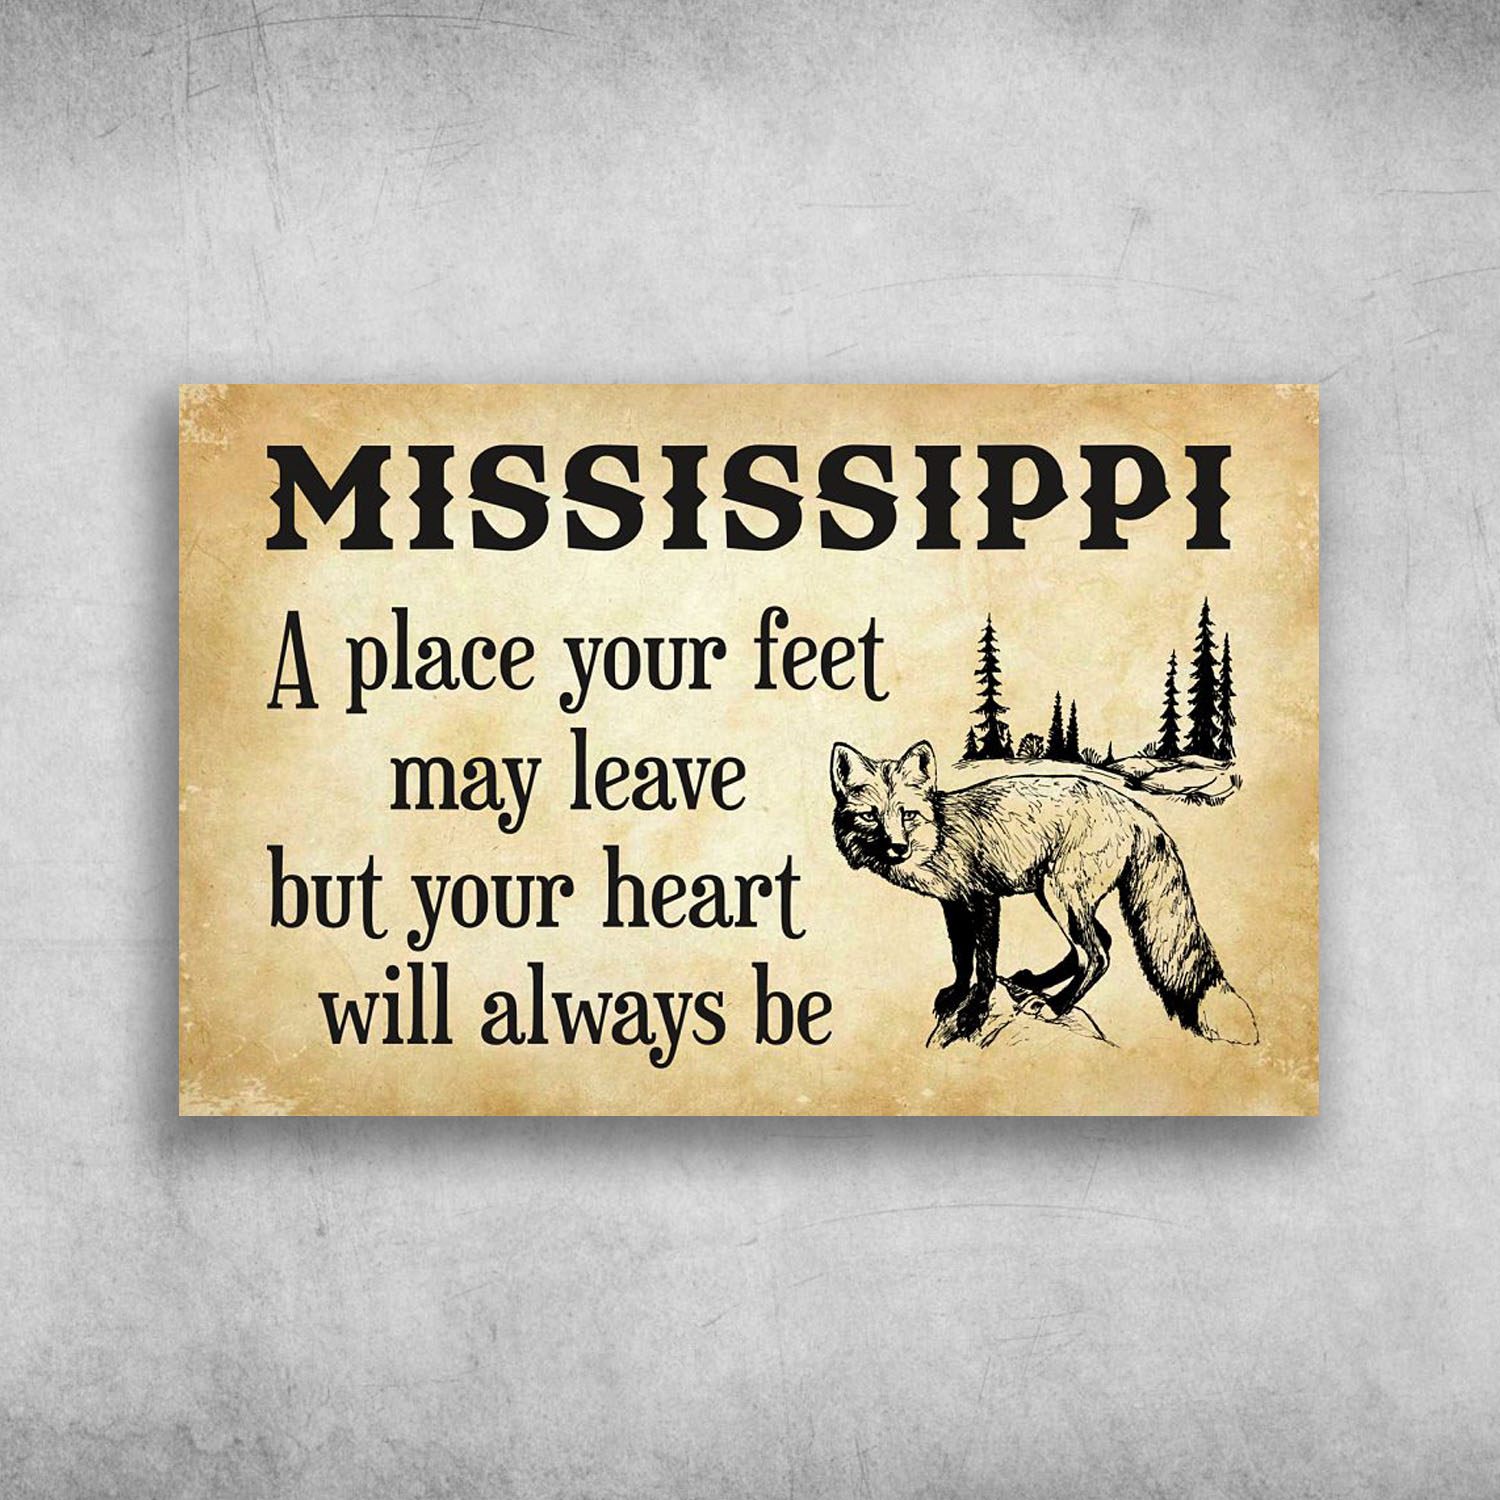 Mississippi A Place Your Feet May Leave